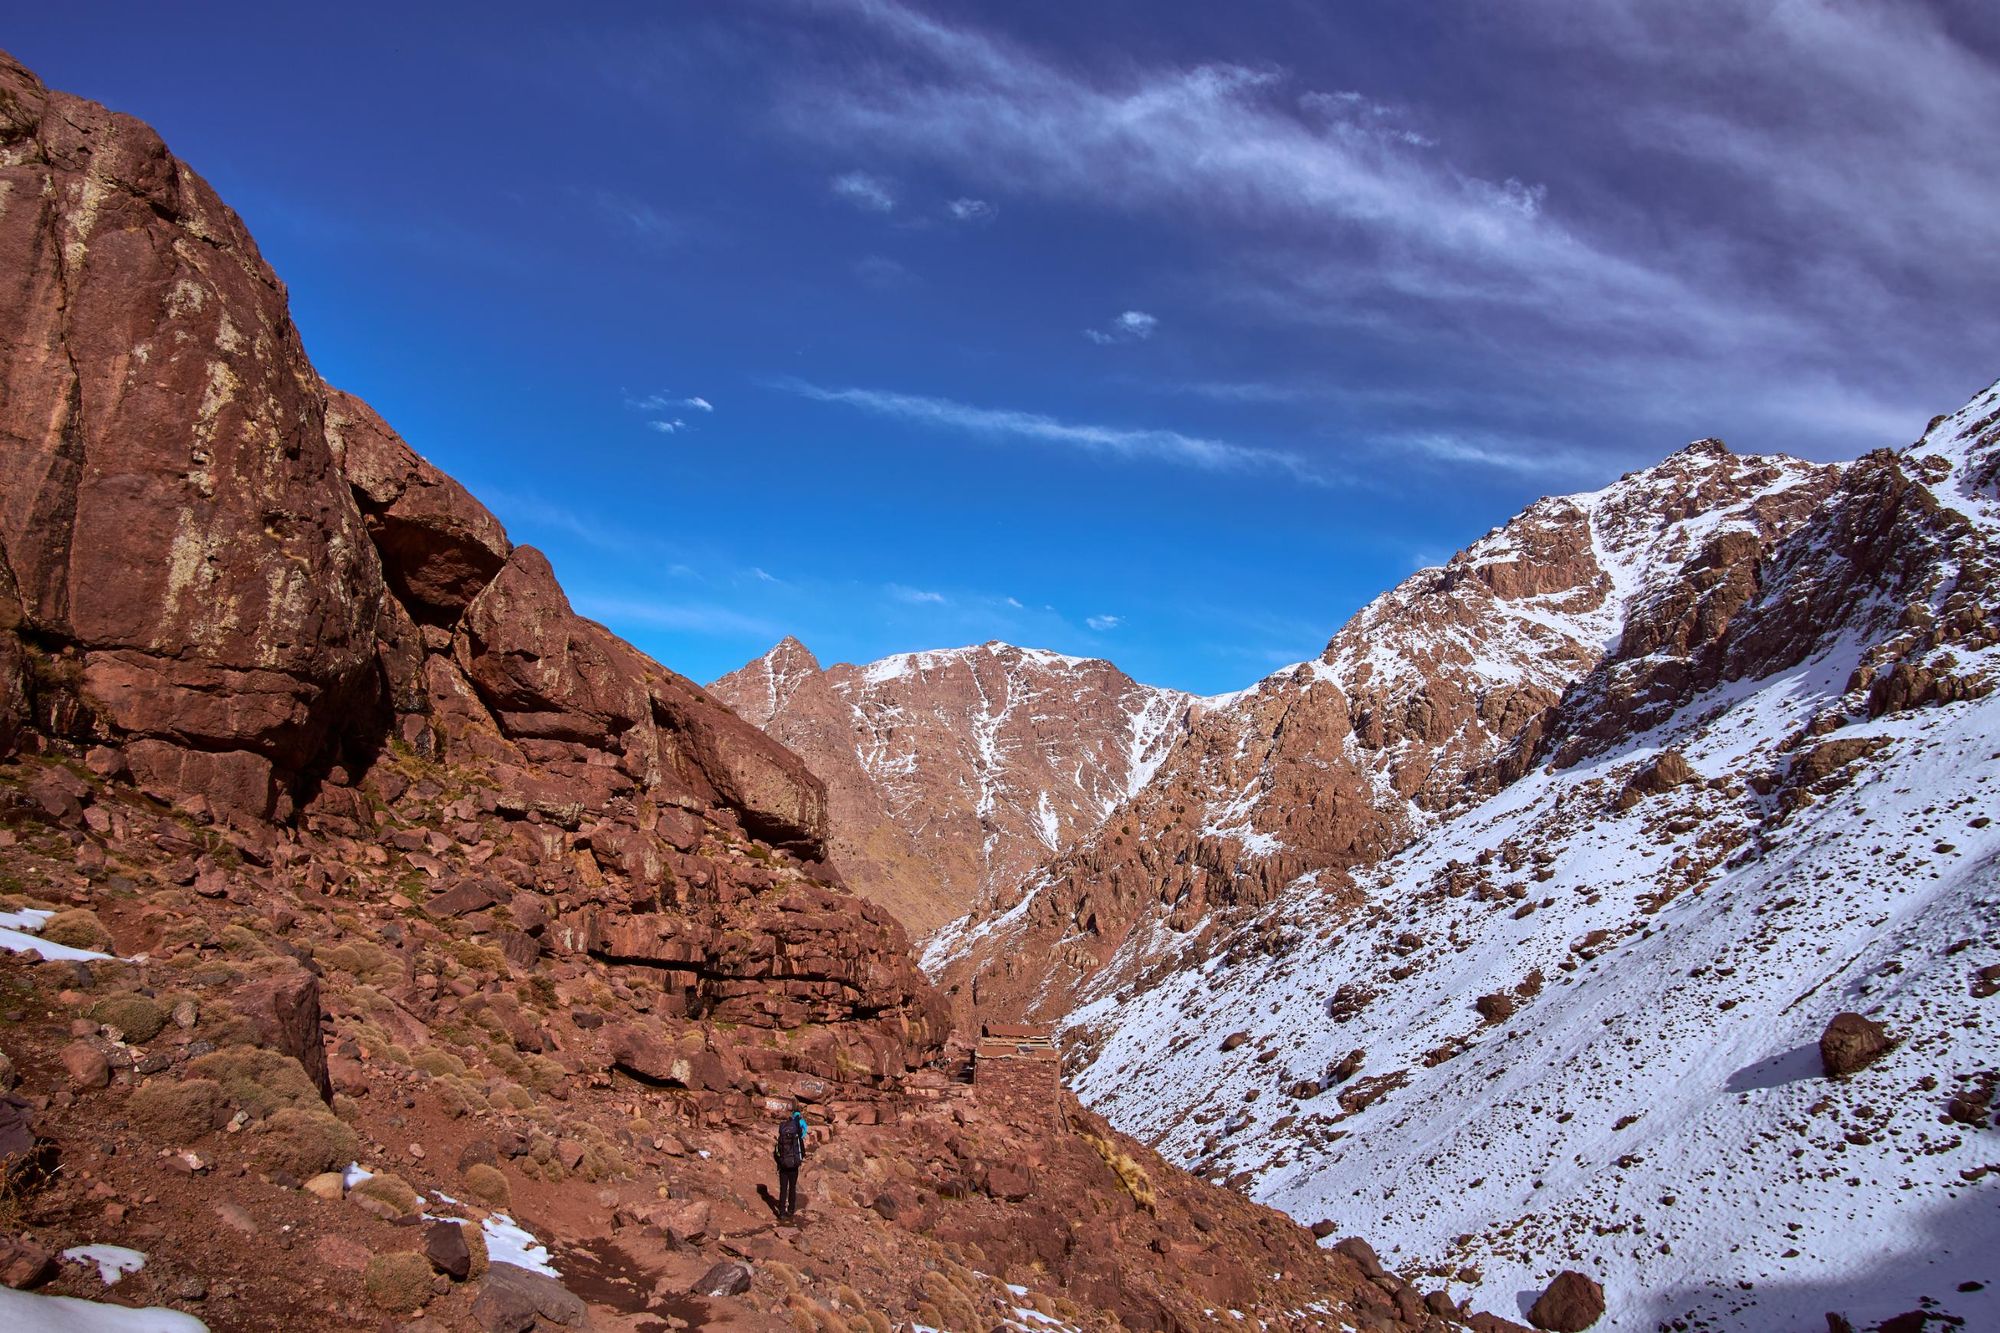 The hiking route, from the summit of Jebel Toubkal heading back to Imlil. Photo: Getty